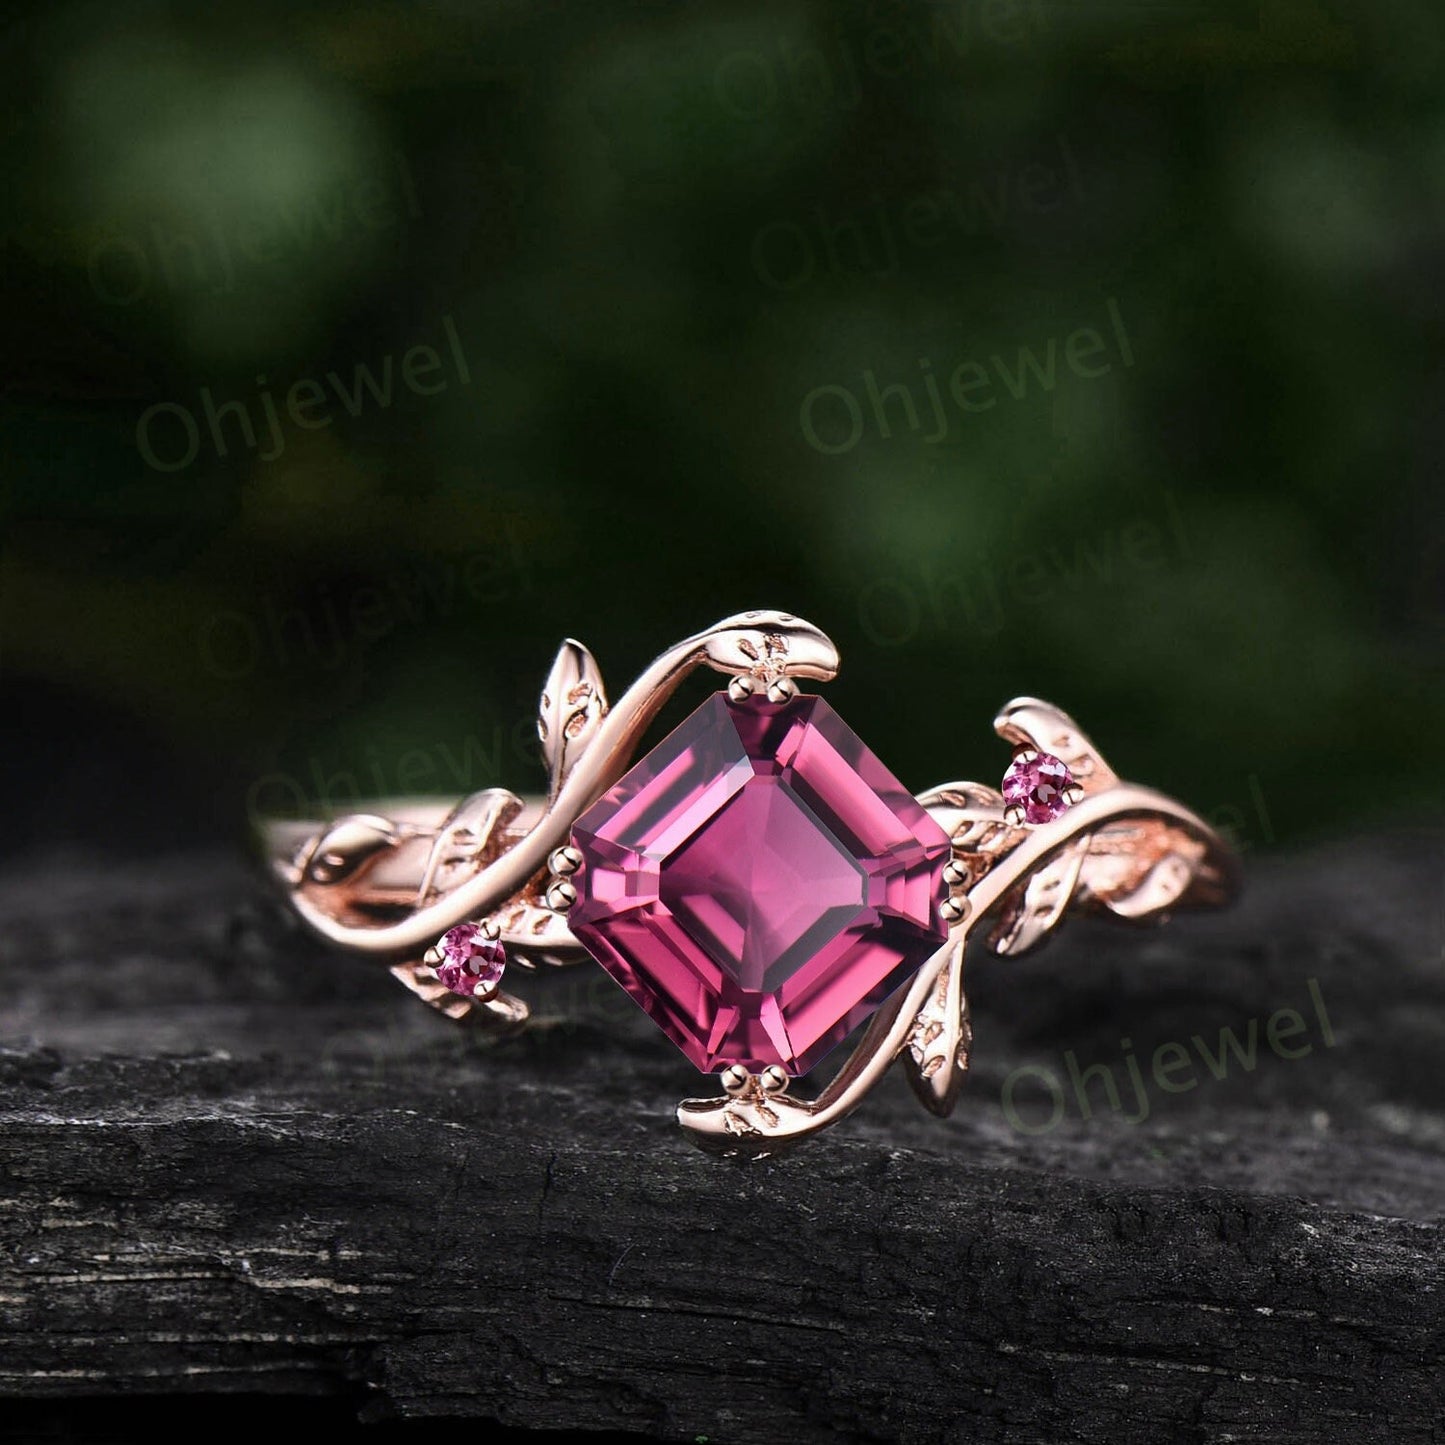 Twig Asscher cut Pink Tourmaline engagement ring 14k rose gold leaf branch three stone diamond ring unique promise wedding ring women gift